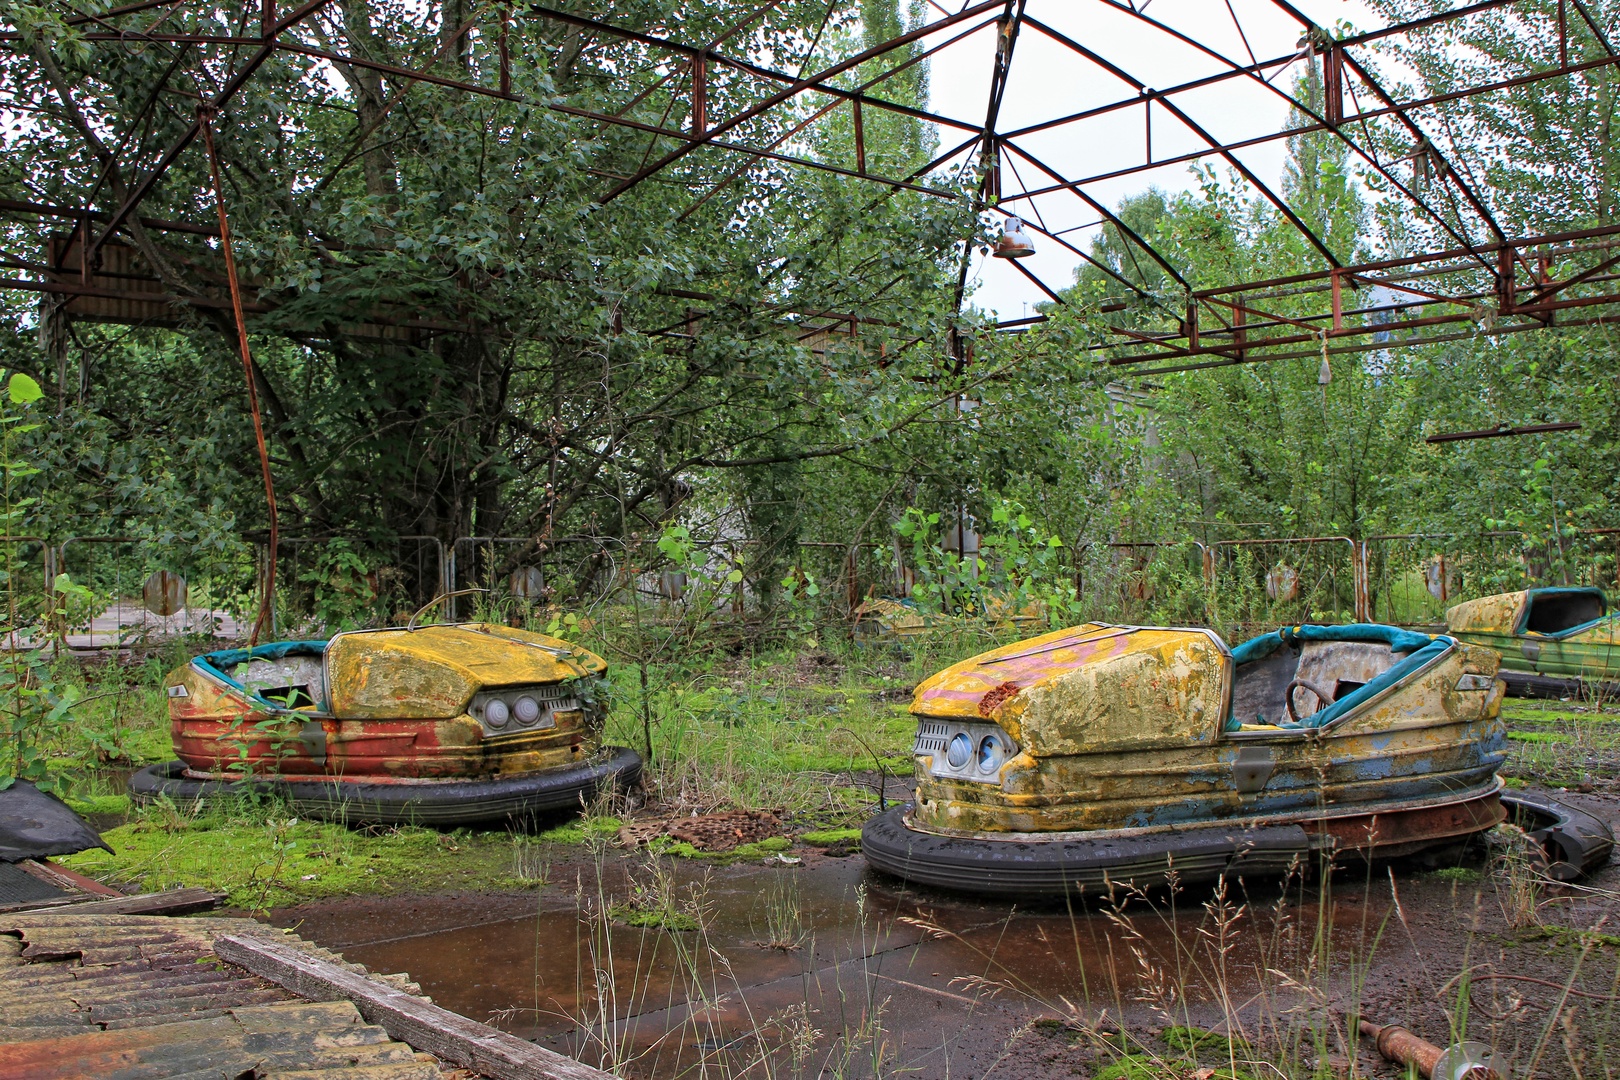 Rusting dodgems in abandoned amusement park overtaken by nature